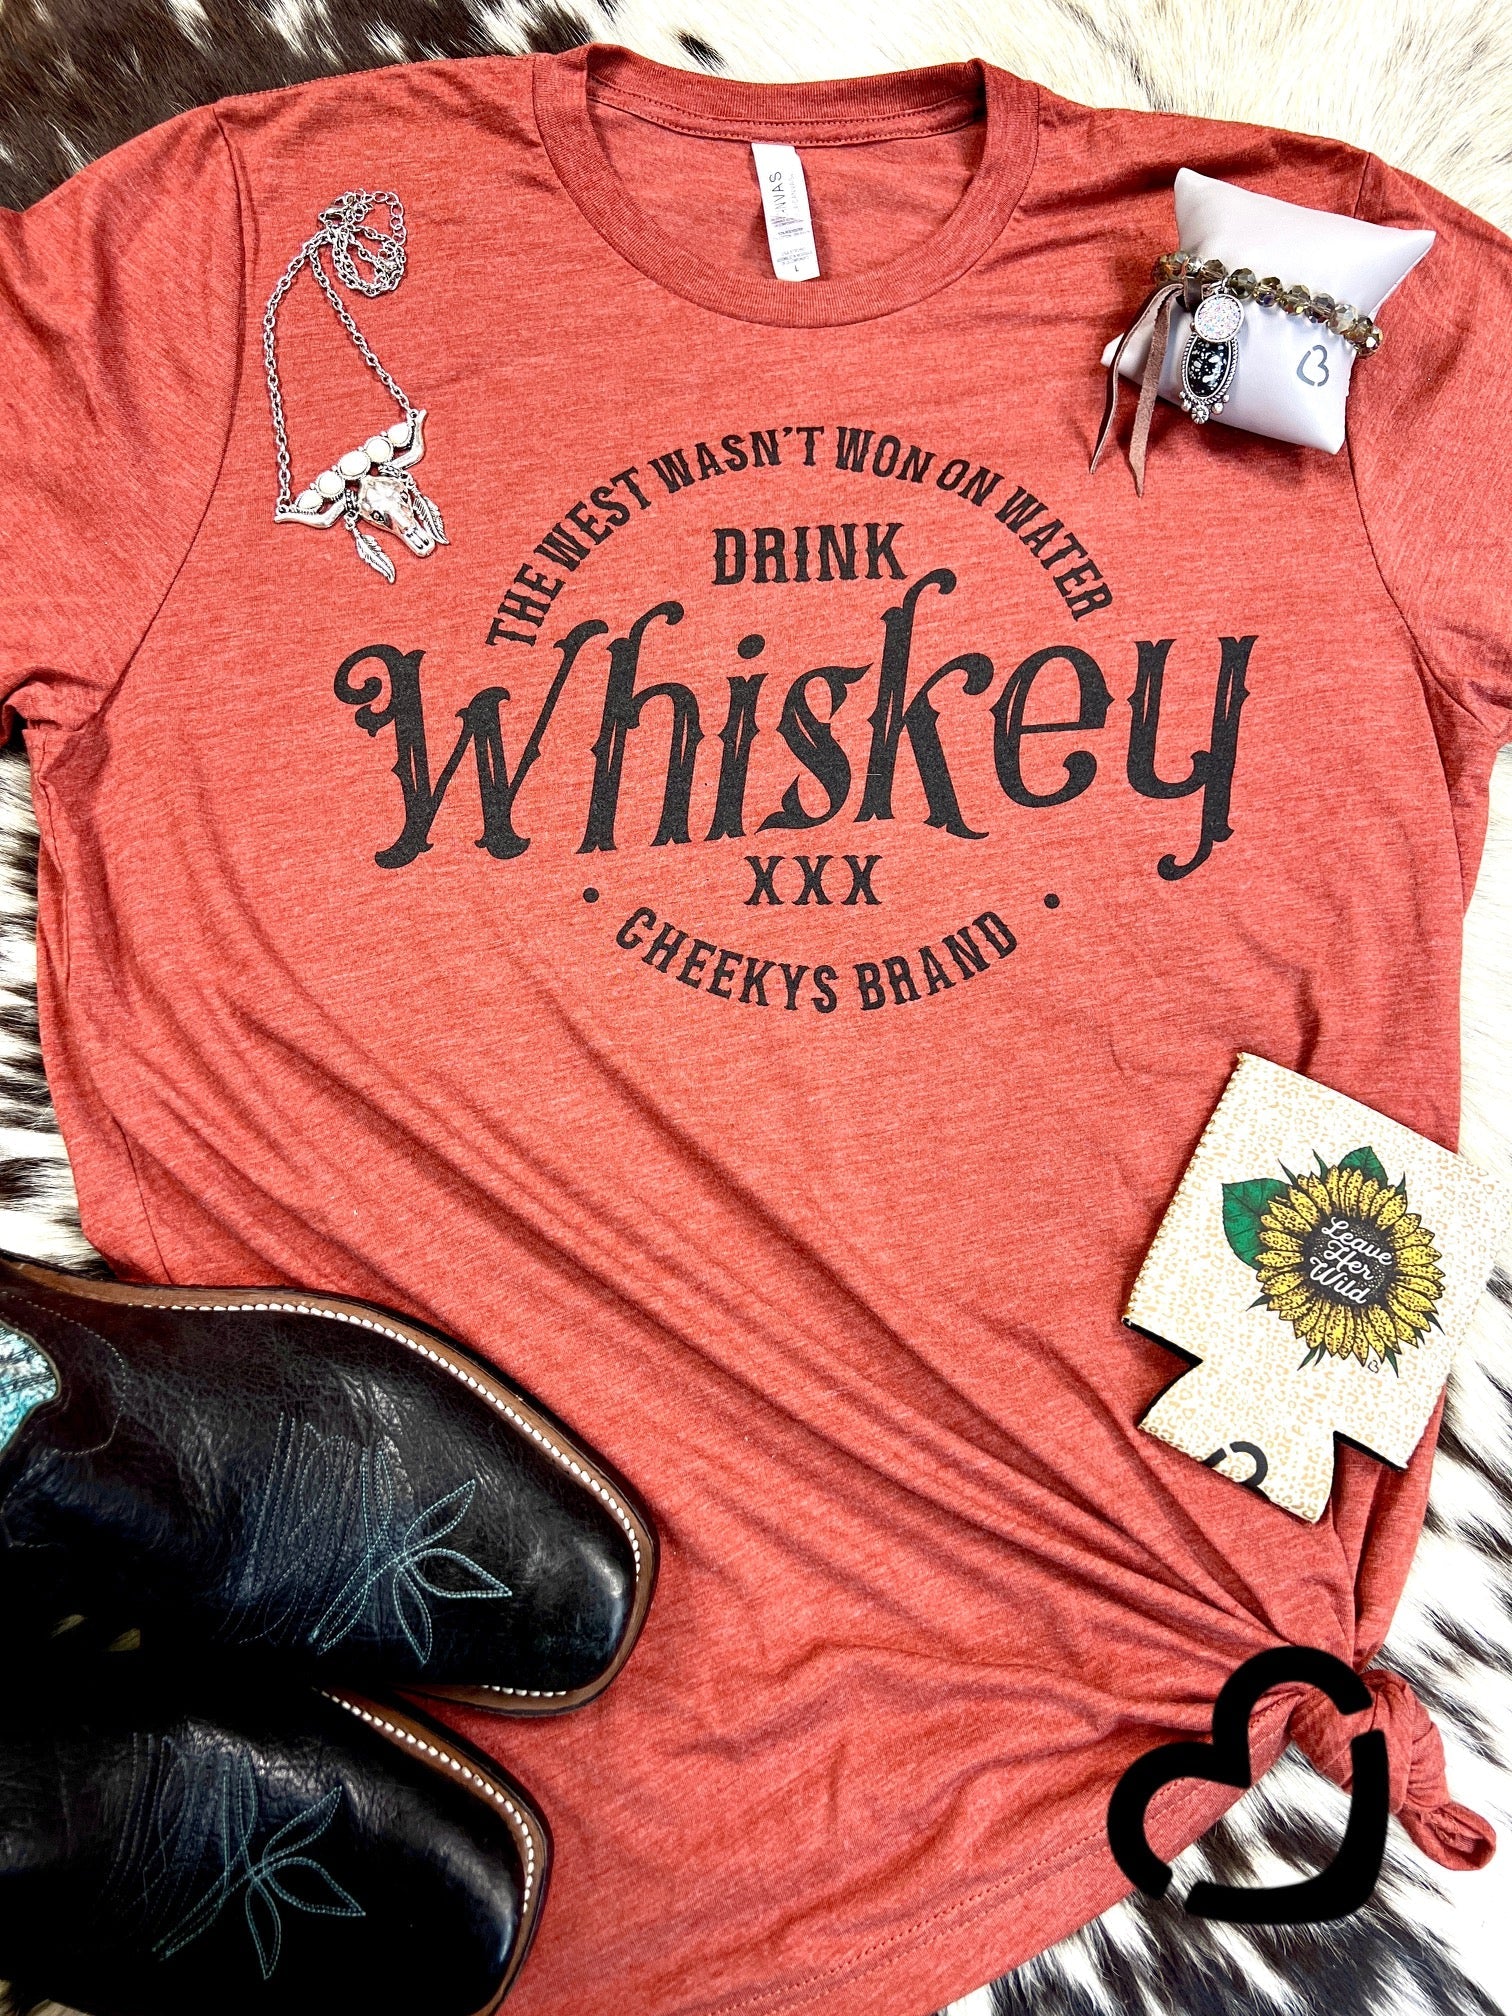 The West Wasn't Won on Water Drink Whiskey Unisex Tee on Rustic Poppy Cheekys Apparel 23 